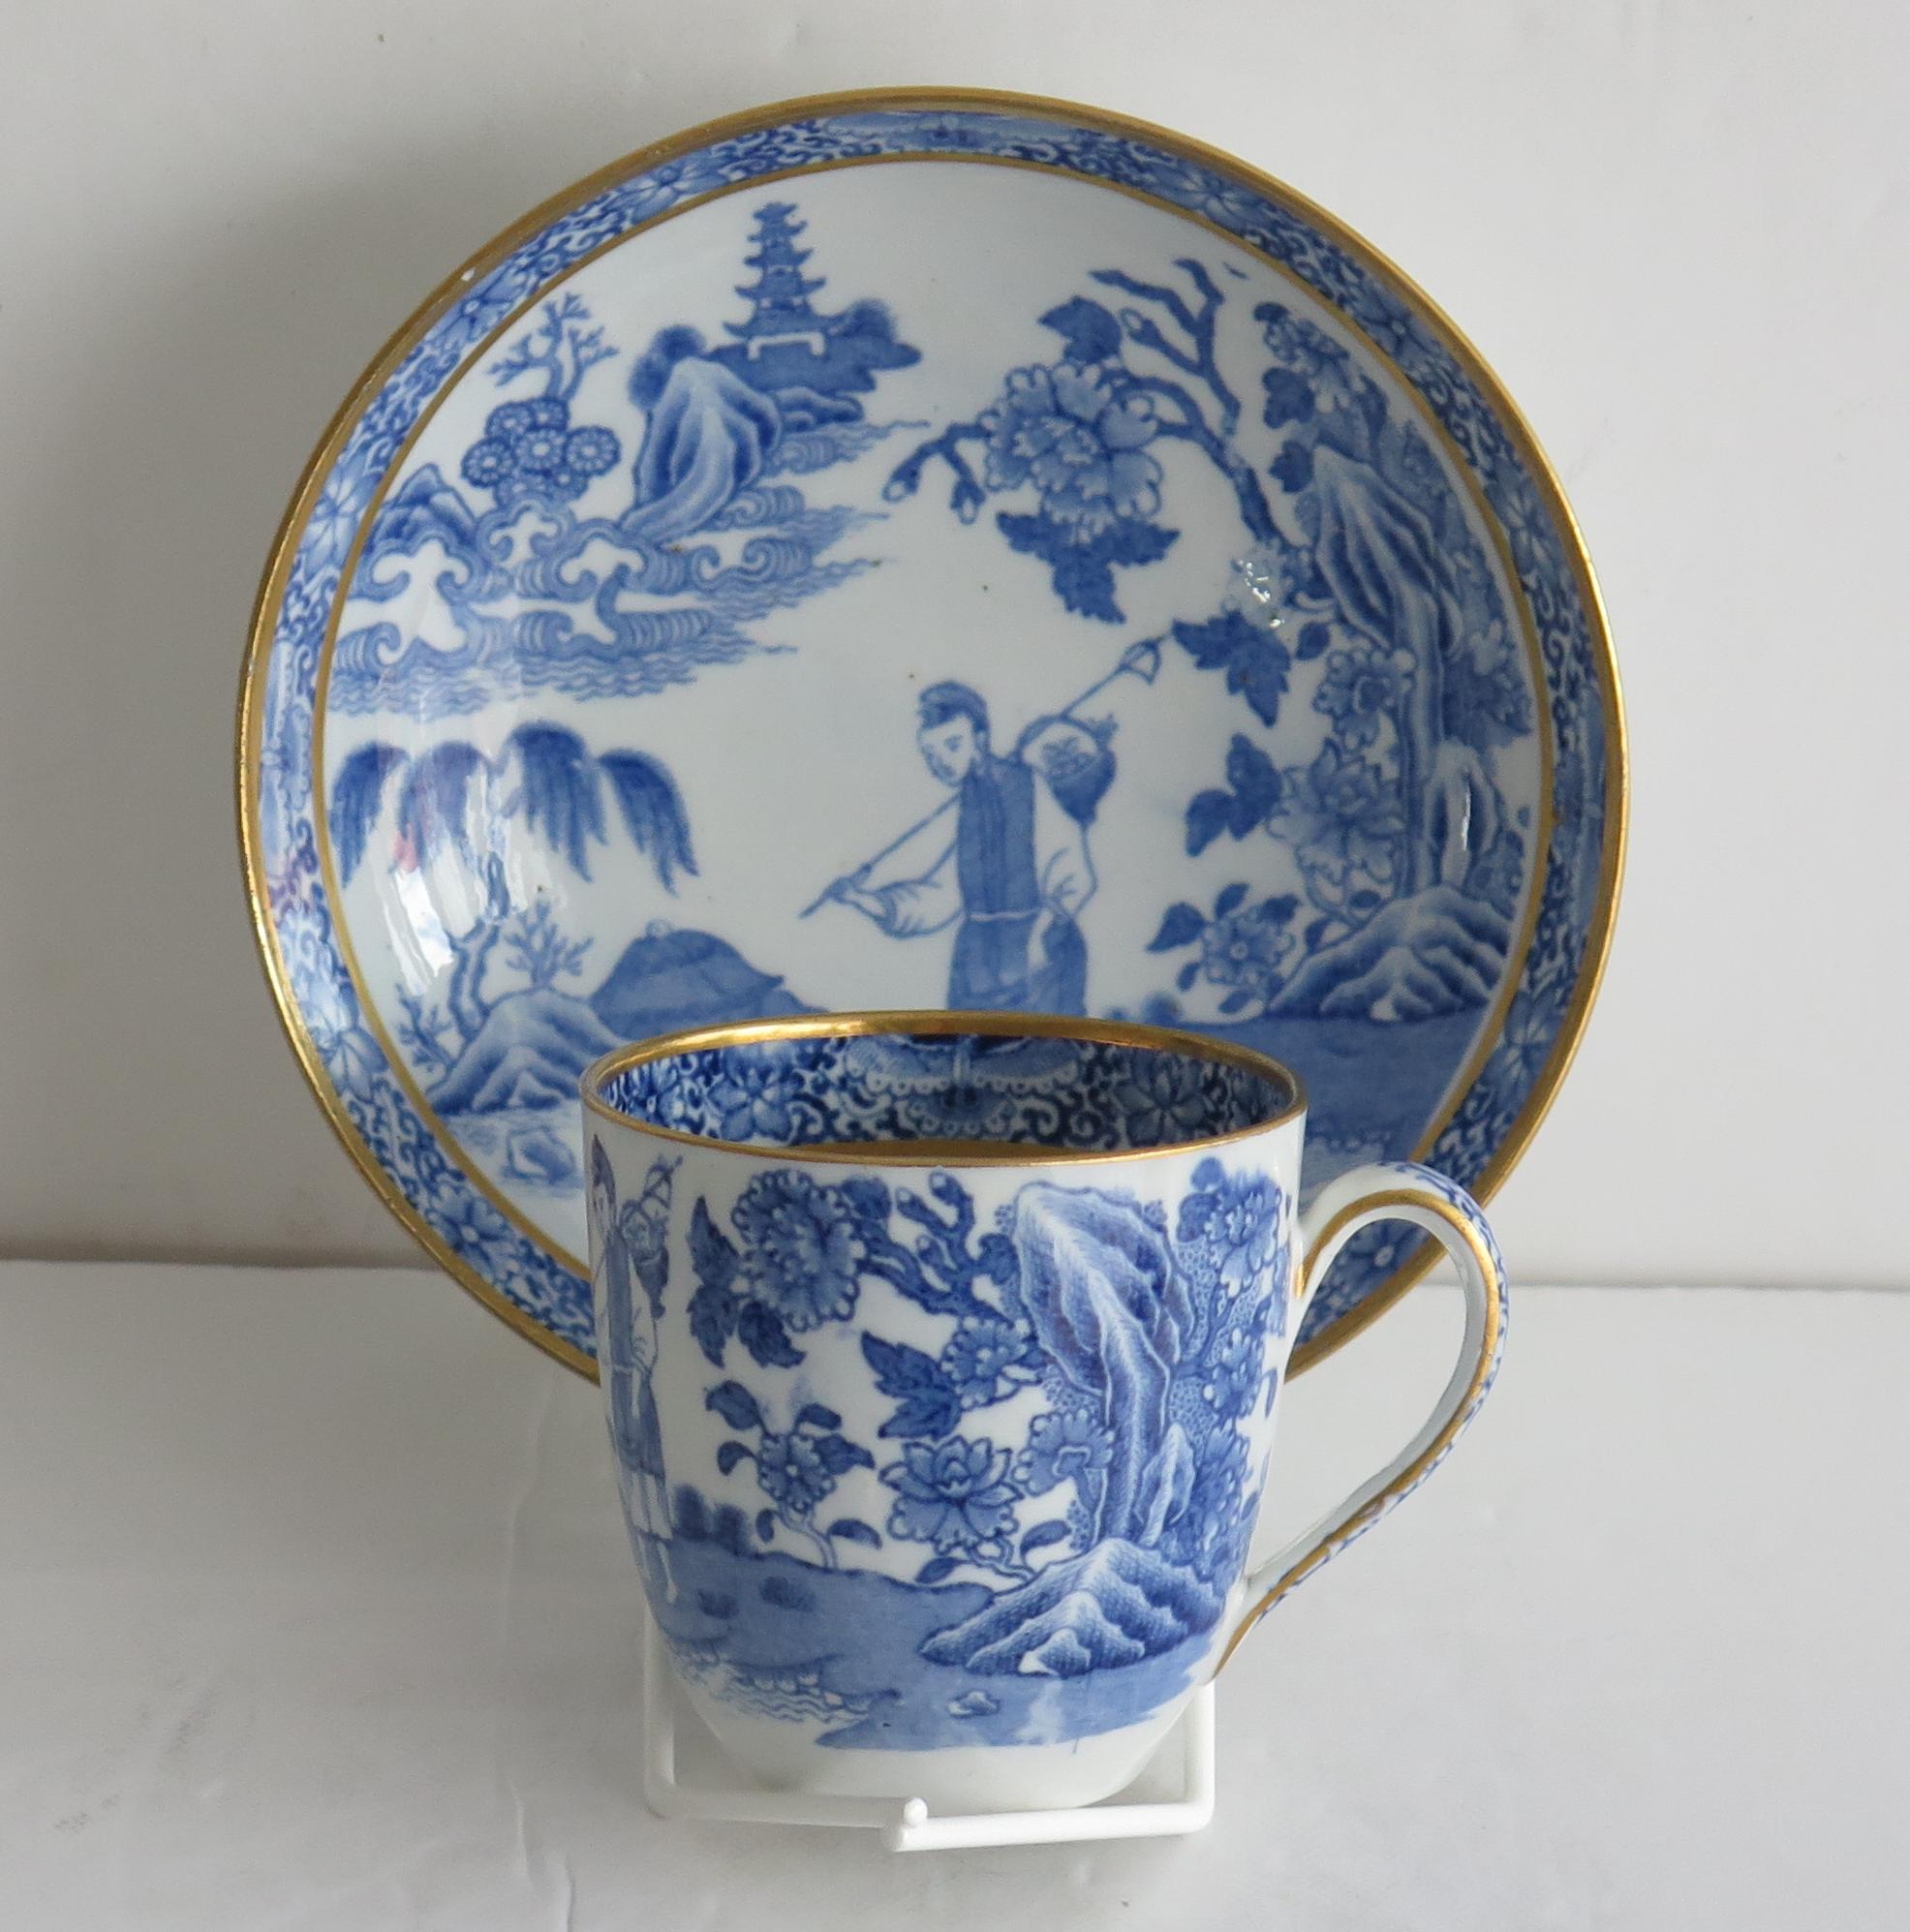 This is a rare coffee cup and saucer in ‘The Traveller’ or ‘One Legged Duck’ blue transfer printed, hand gilded pattern by John Turner & family, of Lane End, Longton, Staffordshire. 

Both pieces are well decorated in a Chinoiserie blue printed